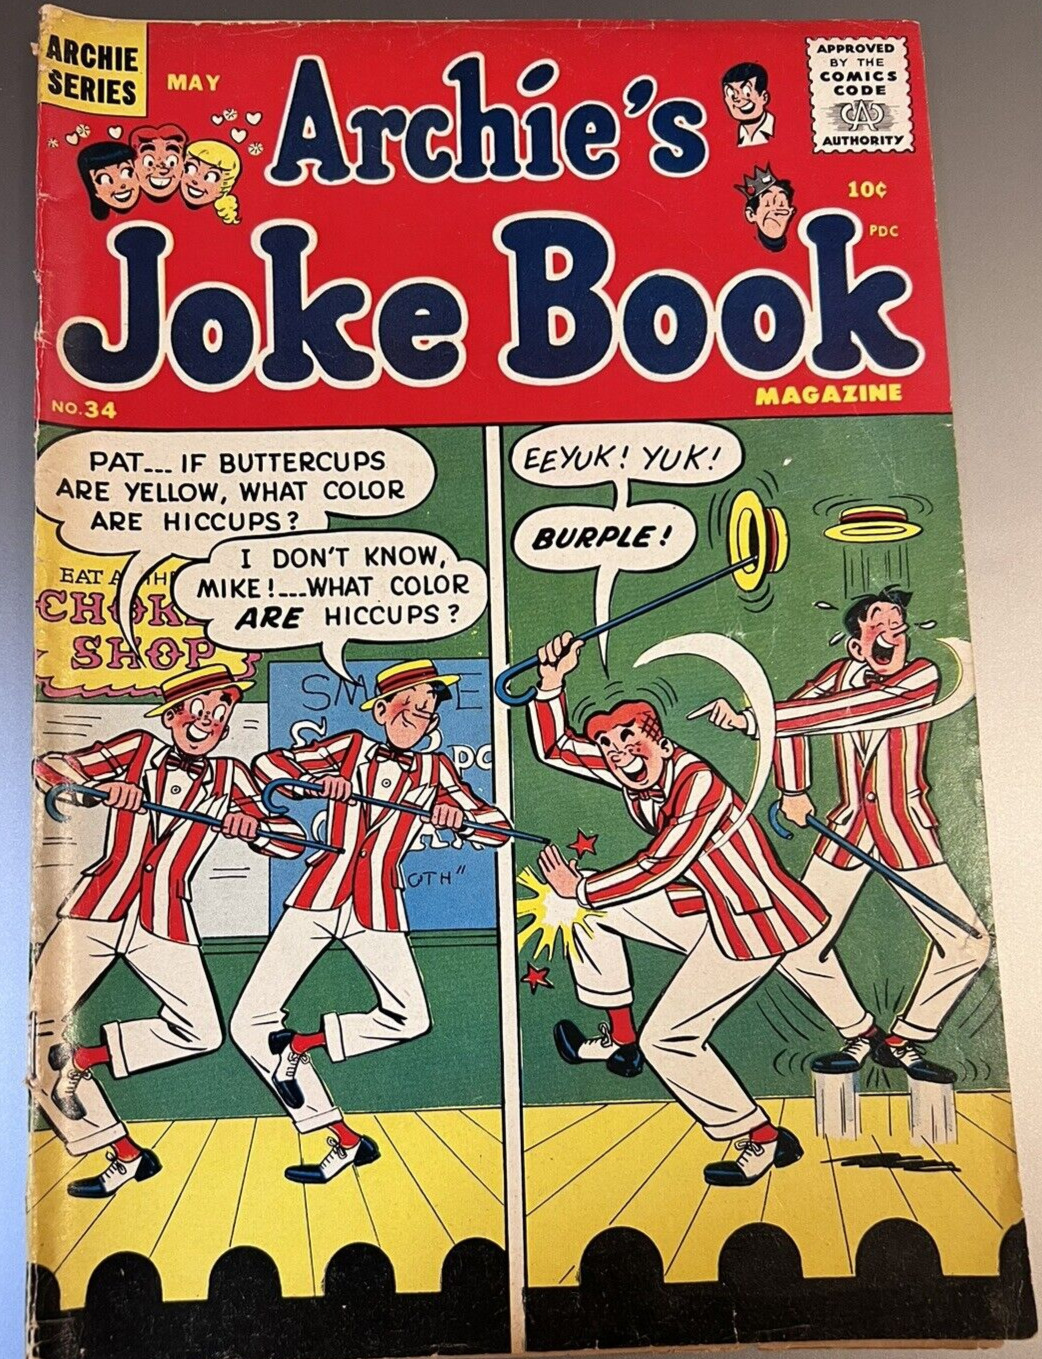 Archie's Joke Book #34 (1958) Awesome Vaudeville Cover